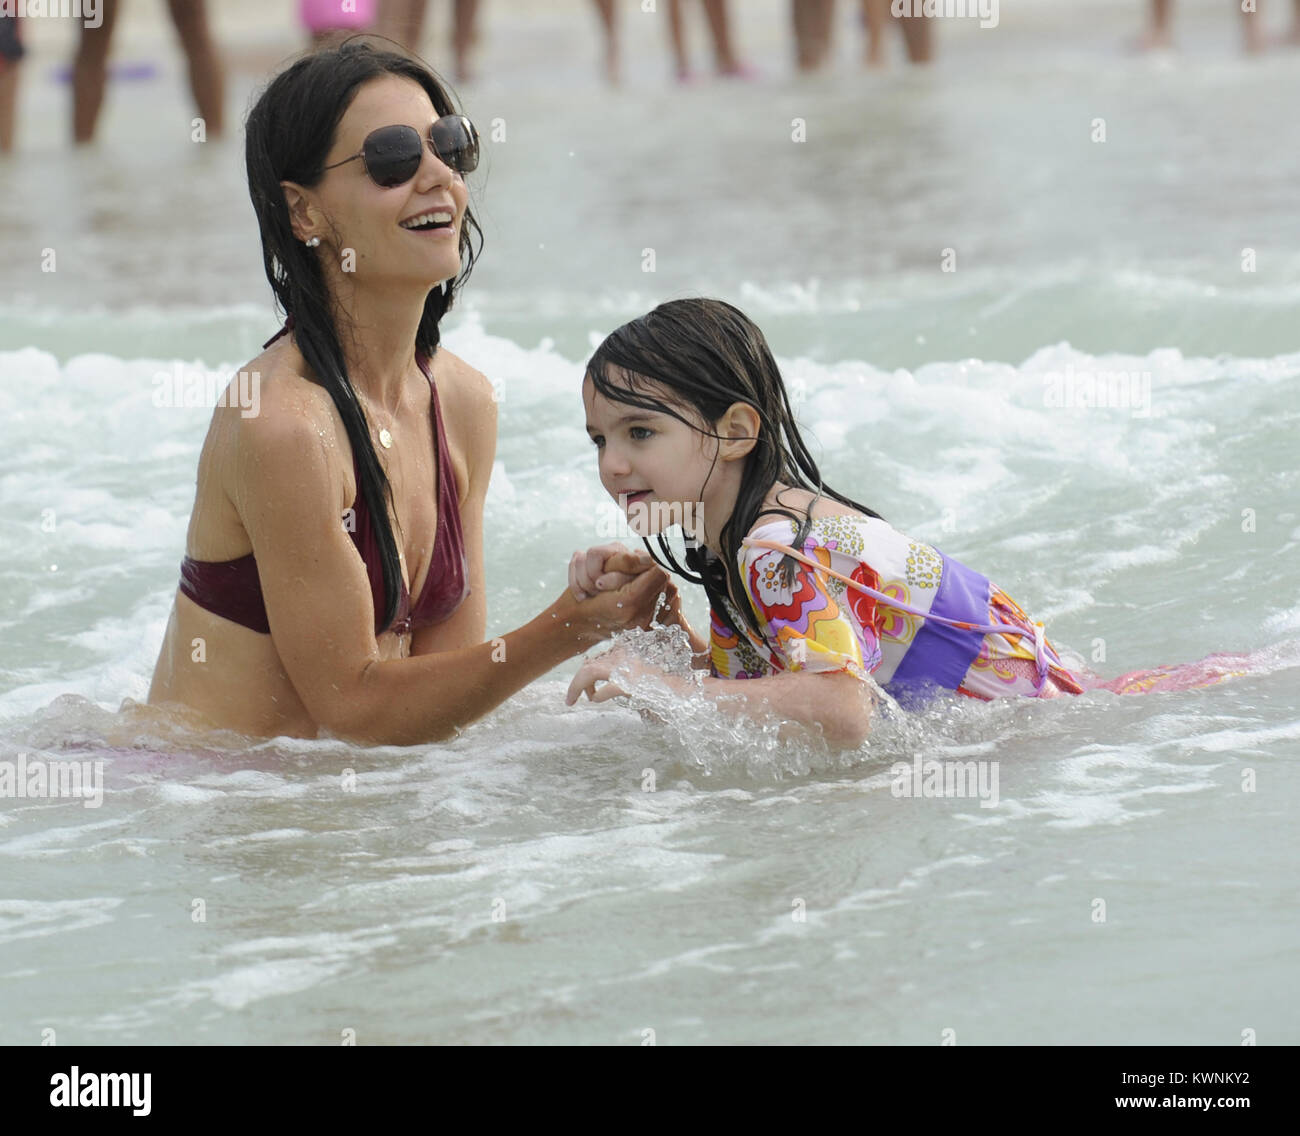 MIAMI BEACH, FL - JUNE 18: Katie Holmes and Suri Cruise had a fun day out on beach today in Miami, outside their hotel.  The famous mother and daughter pair played in the sand and splashed in the waves, entertaining themselves while Tom Cruise is busy filming the feature “Rock of Ages.”  Suri wasn’t quite prepared for the water, as she splashed around in a dress instead of a bathing suit. But, Katie Holmes rocked a red bikini, showing off a flat stomach and proving that she isn’t hiding a baby bump.   on June 18, 2011 in Miami Beach, Florida    People:  Katie Holmes Suri Cruise Stock Photo